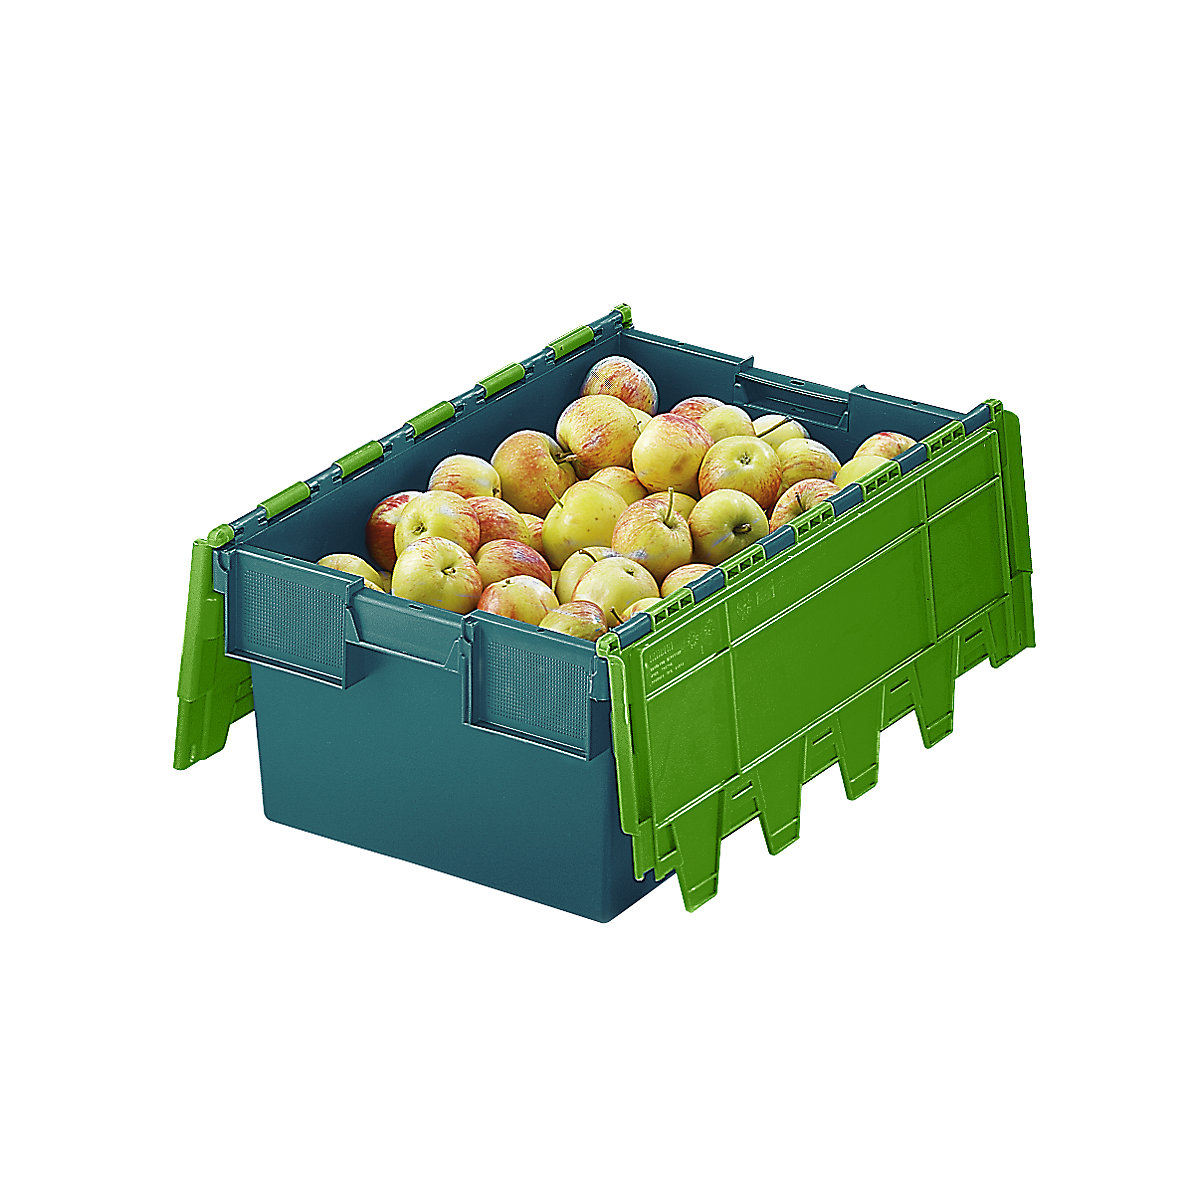 Reusable stacking containers with folding lids, capacity 40 litres, LxWxH 600 x 400 x 250 mm, green